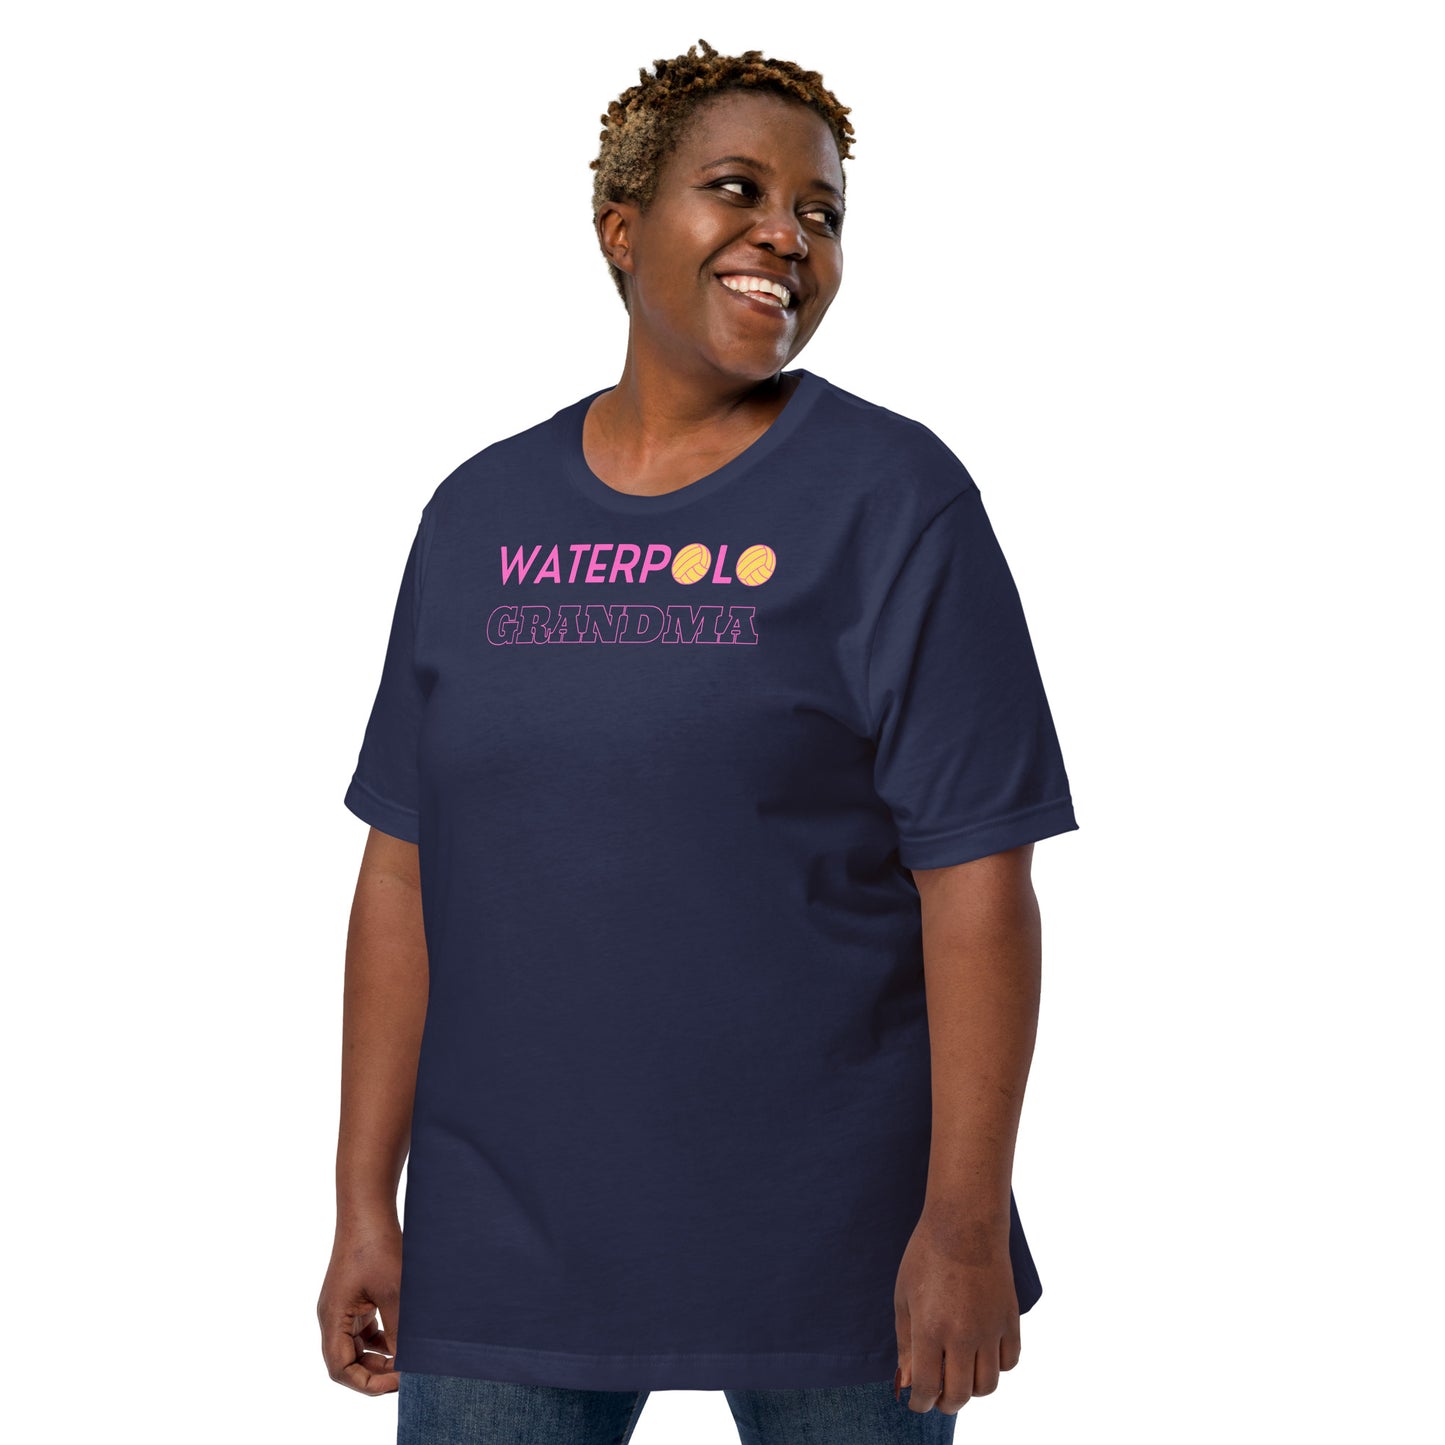 Waterpolo Grandma - Pink Lettering - Unisex Soft T-shirt - Bella Canvas 3001